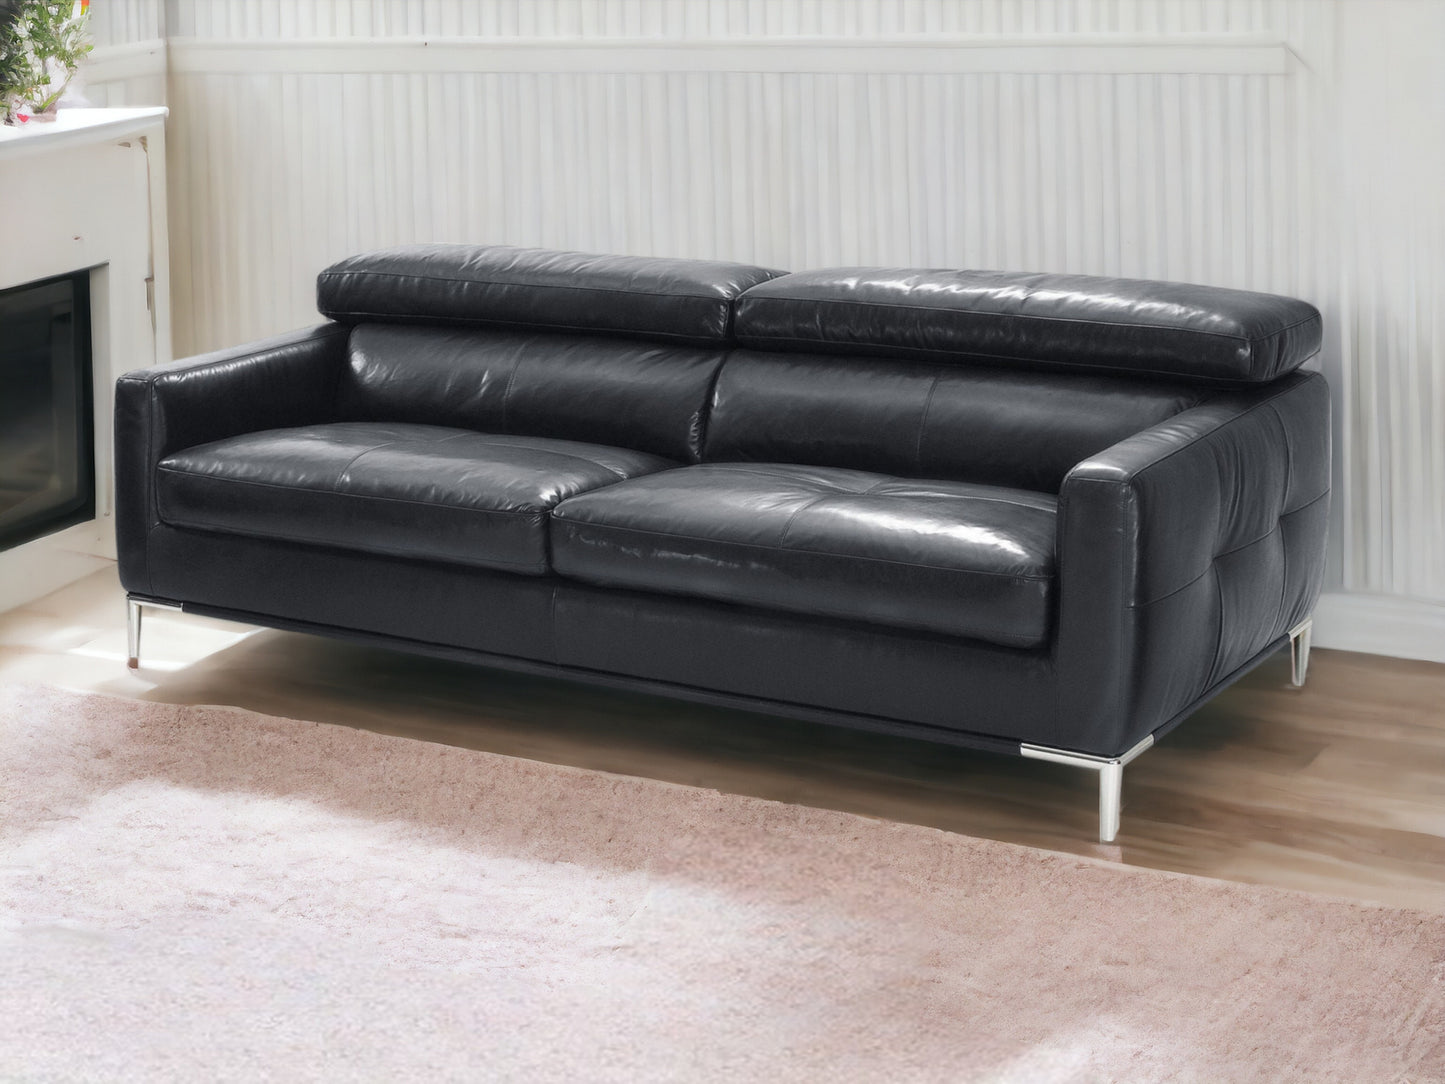 79" Black Genuine Leather Sofa With Silver Legs